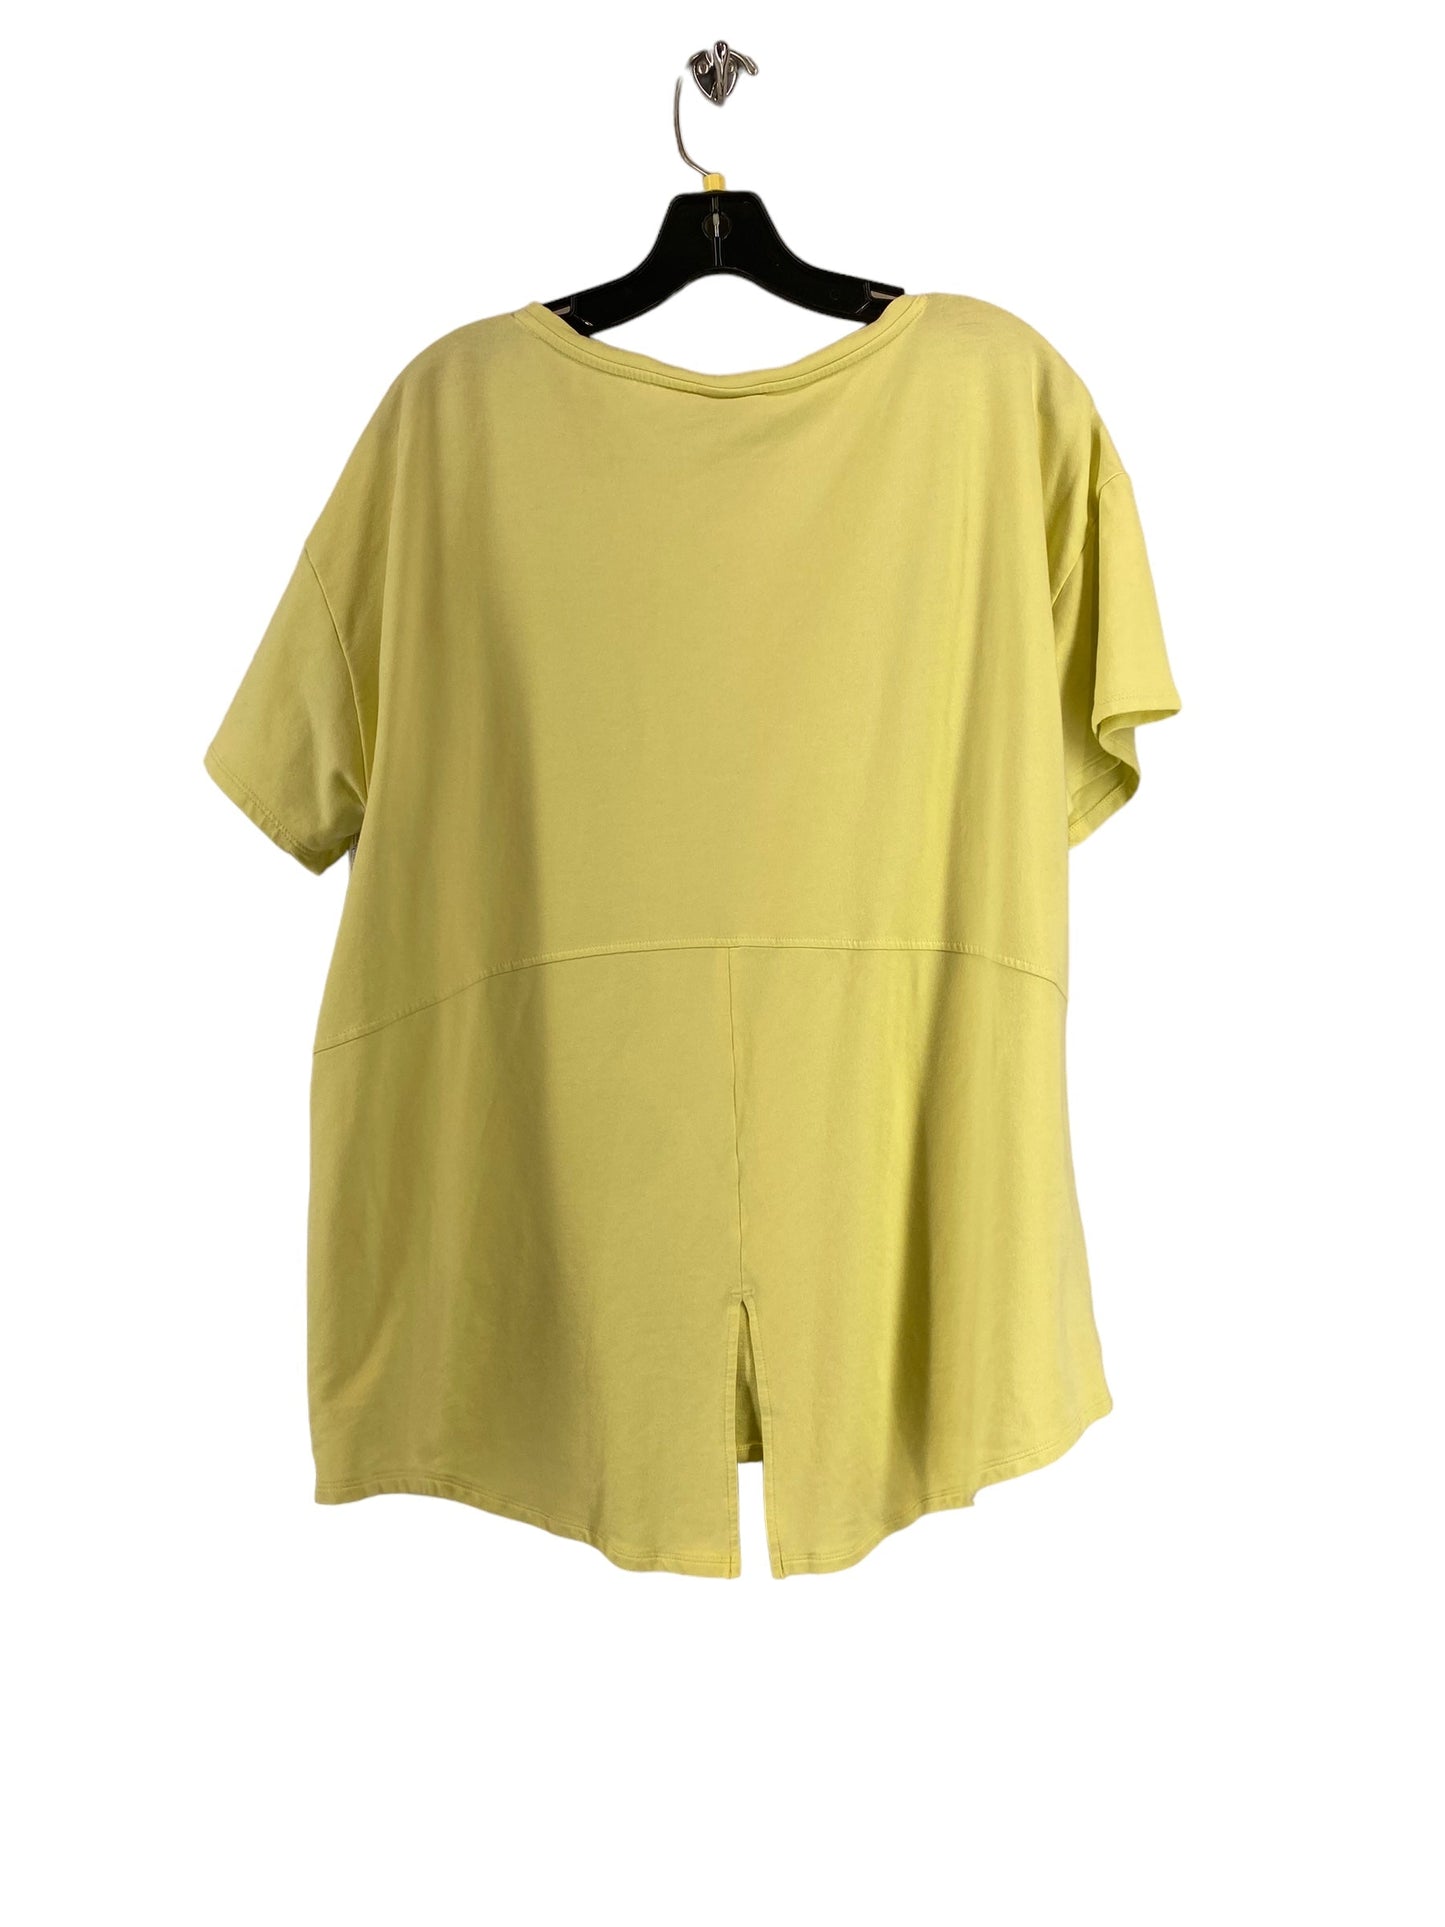 Yellow Top Short Sleeve Chicos, Size 3